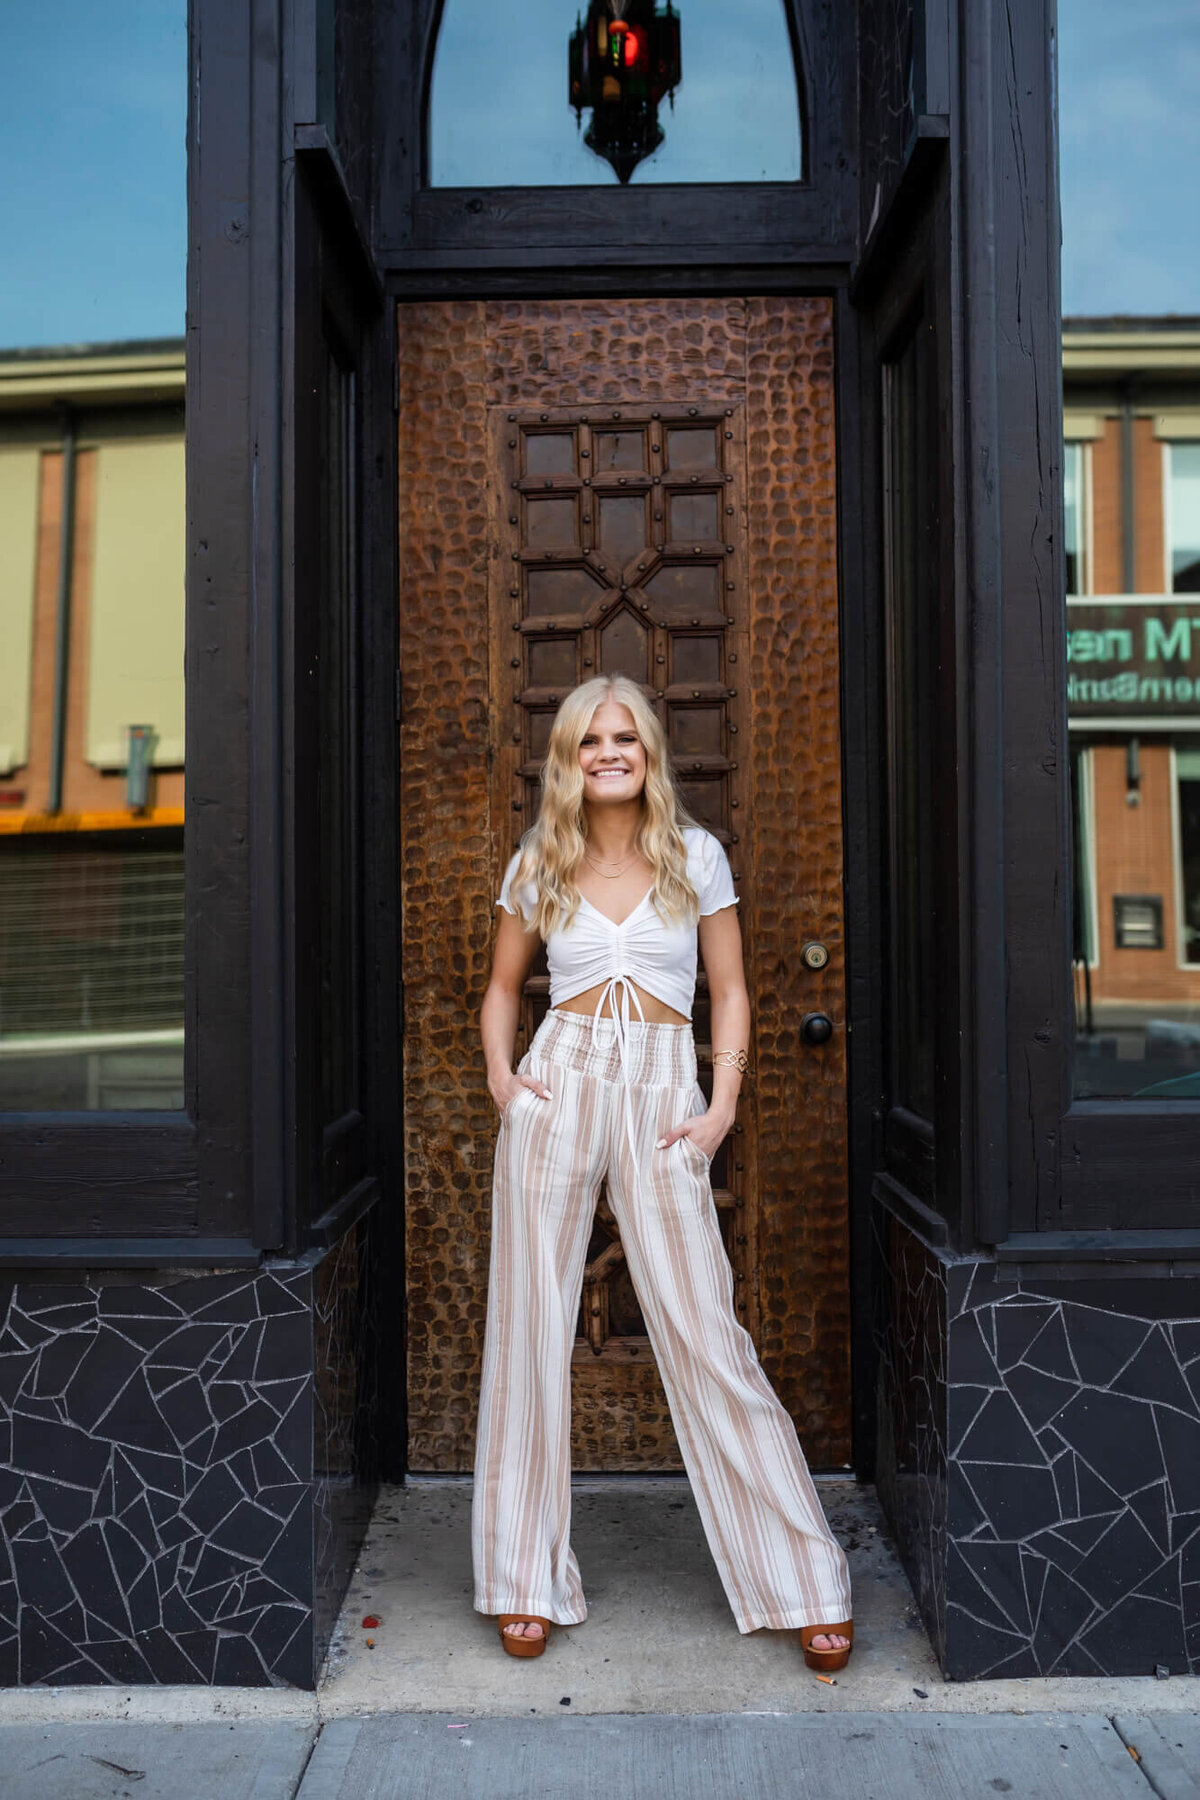 Confidently posed beautiful blond high school senior girl wearing a white crop top and white striped palazzo pants standing in a downtown intricate doorway. Captured by Springfield, MO senior photographer Dynae Levingston.